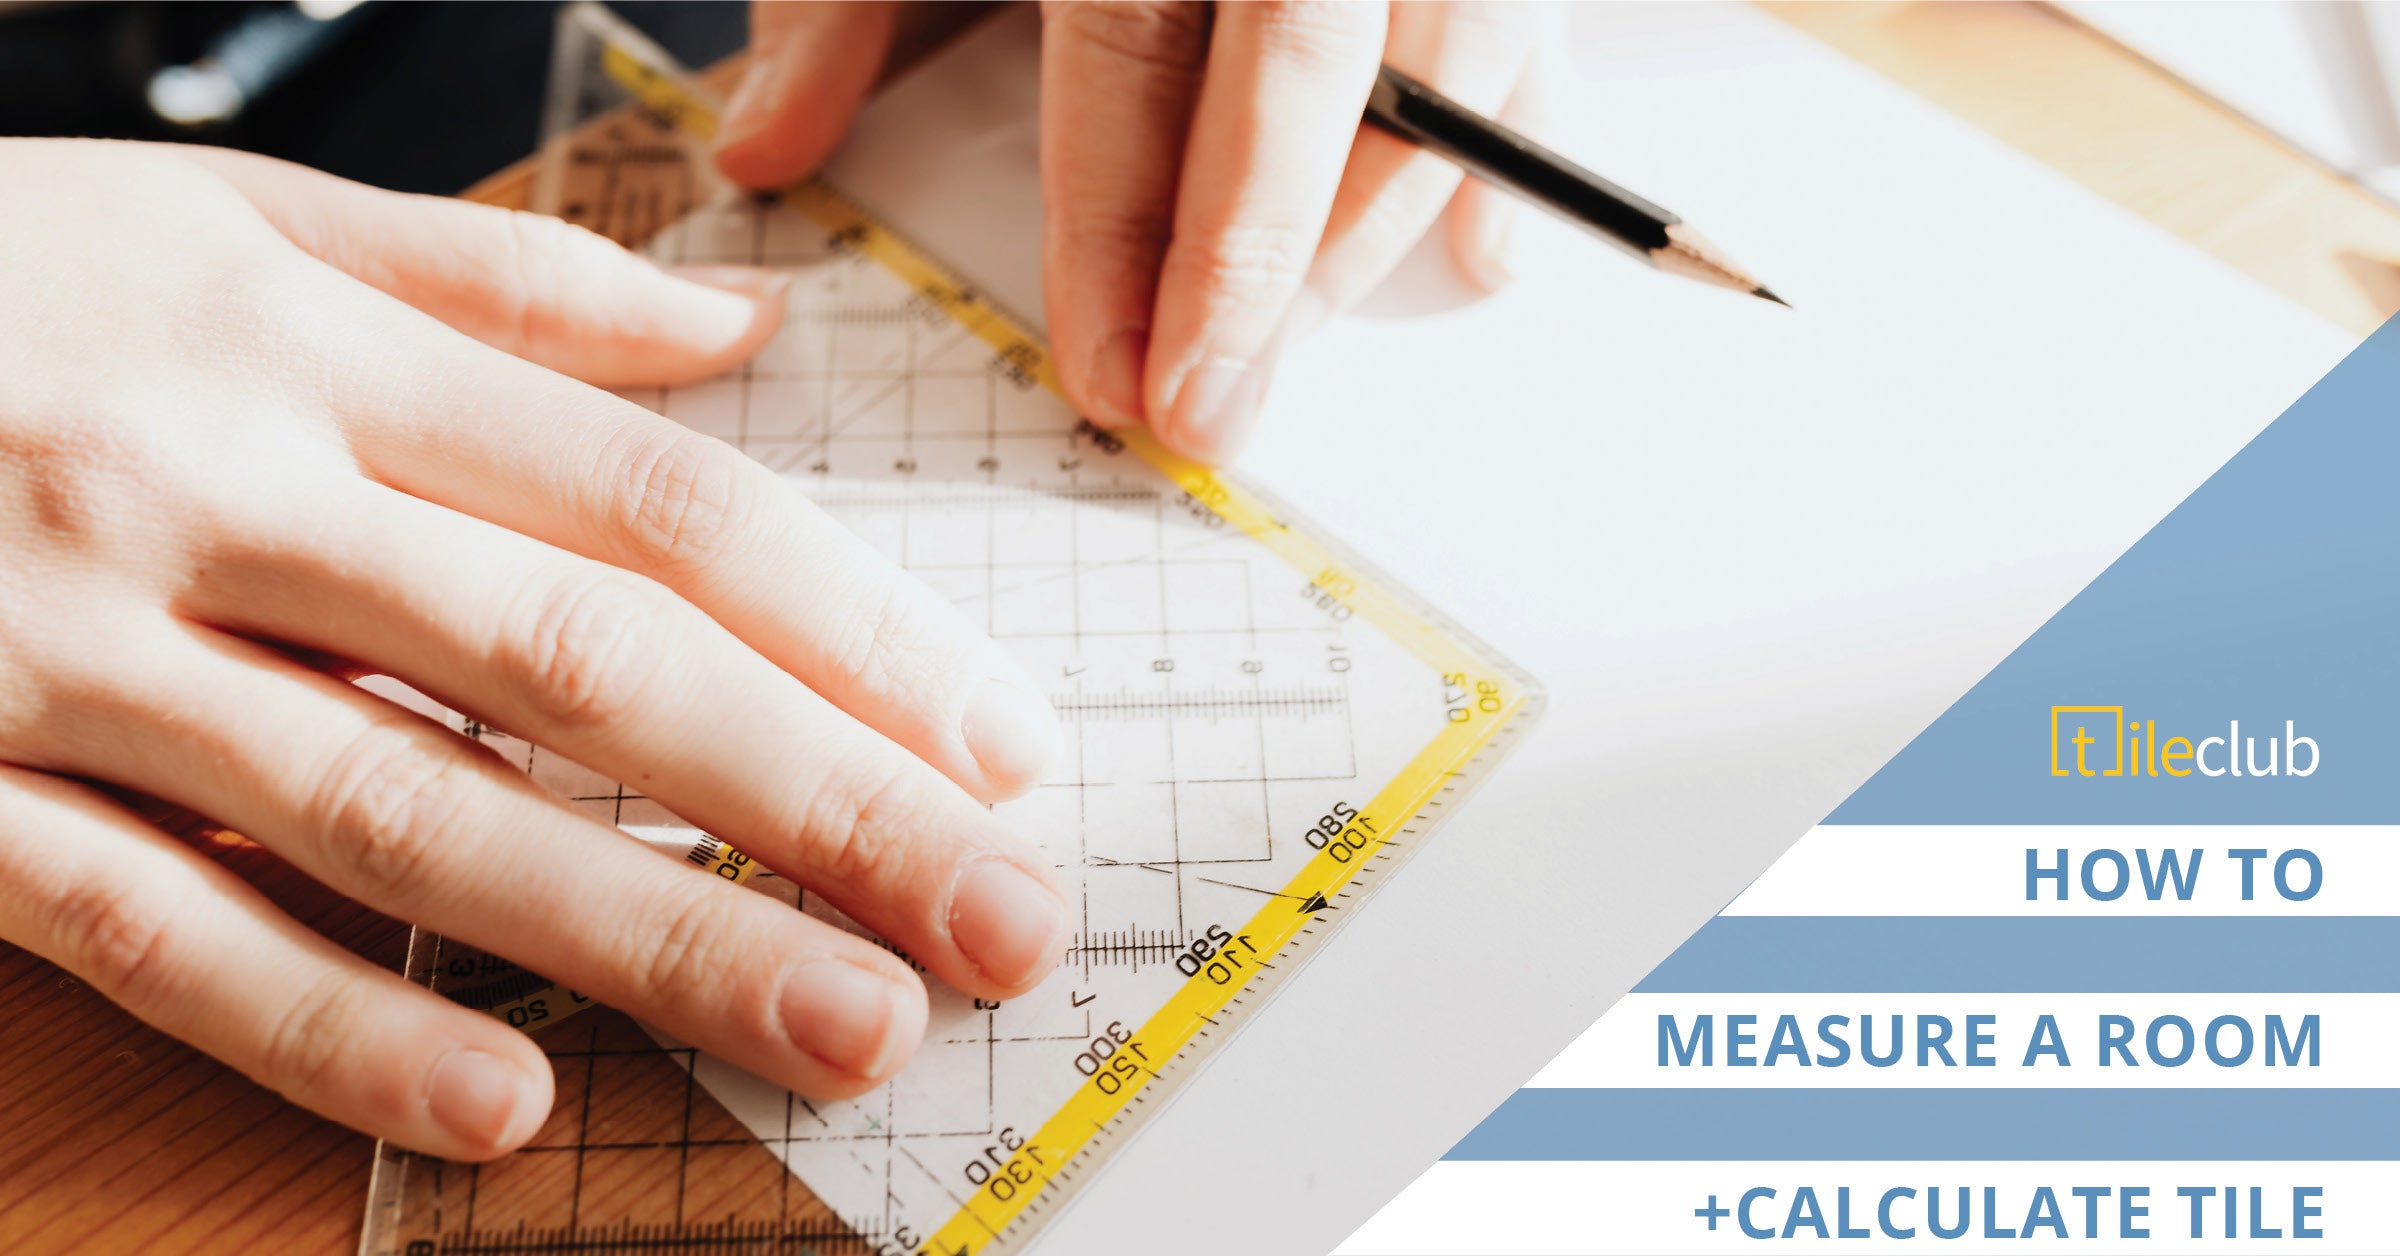 How to Measure a Room for Tile and Calculate Square Footage